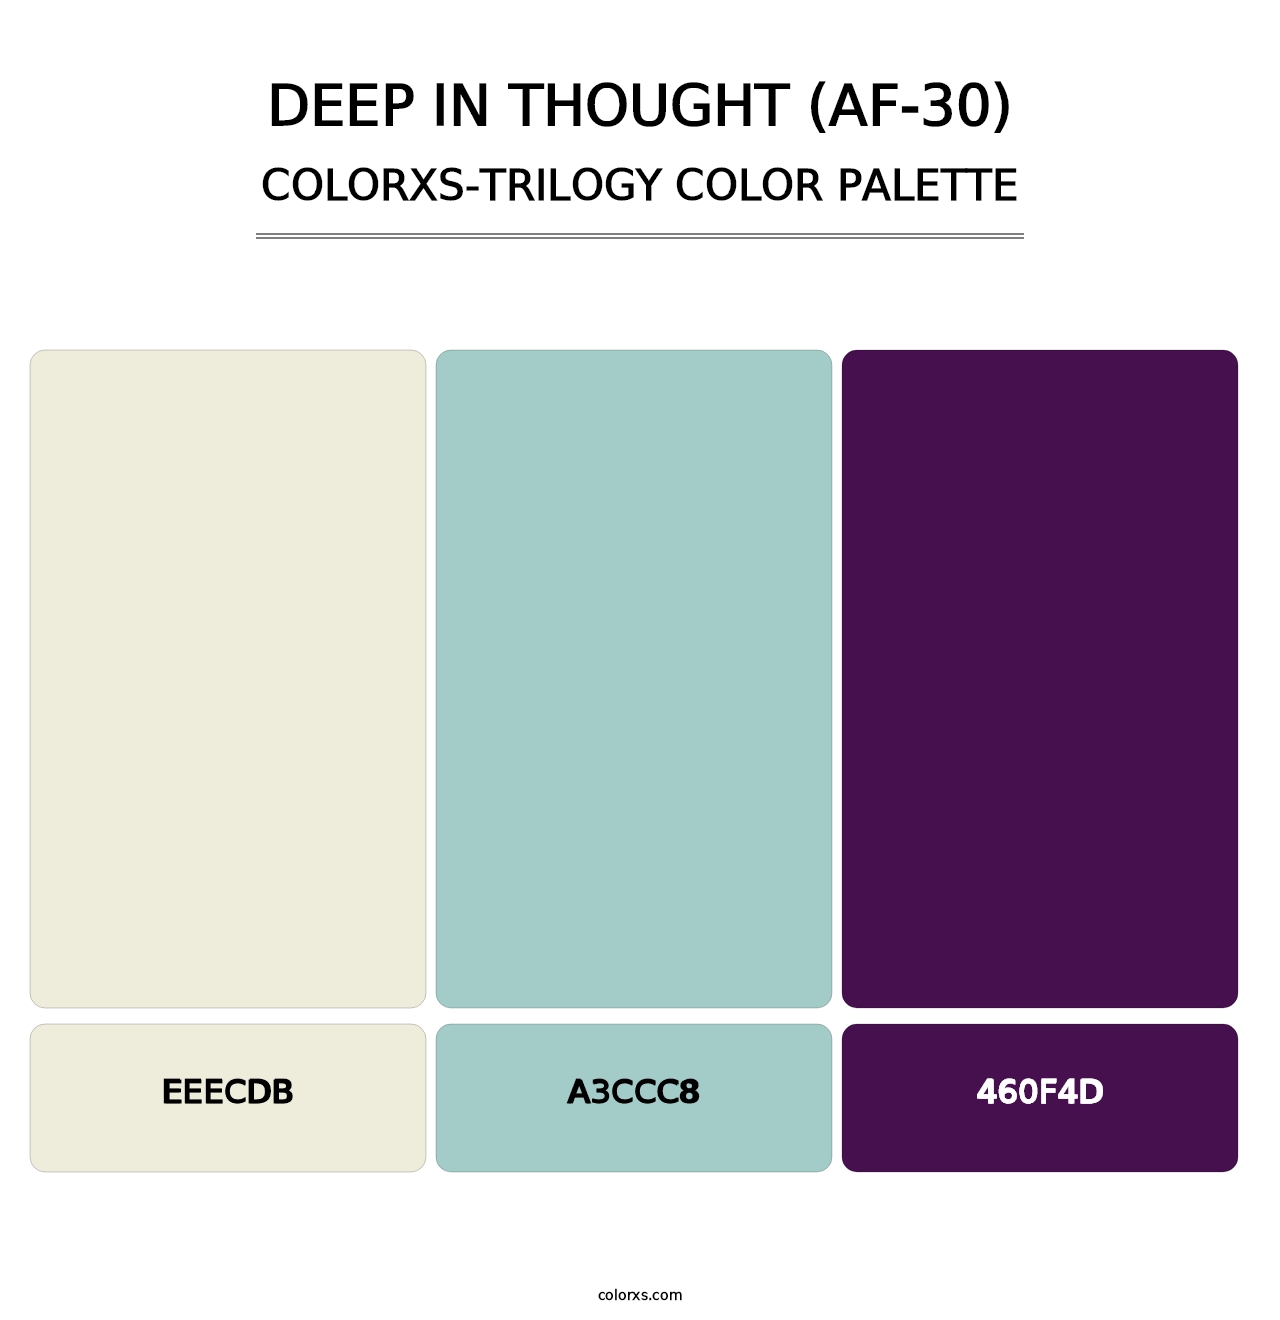 Deep in Thought (AF-30) - Colorxs Trilogy Palette